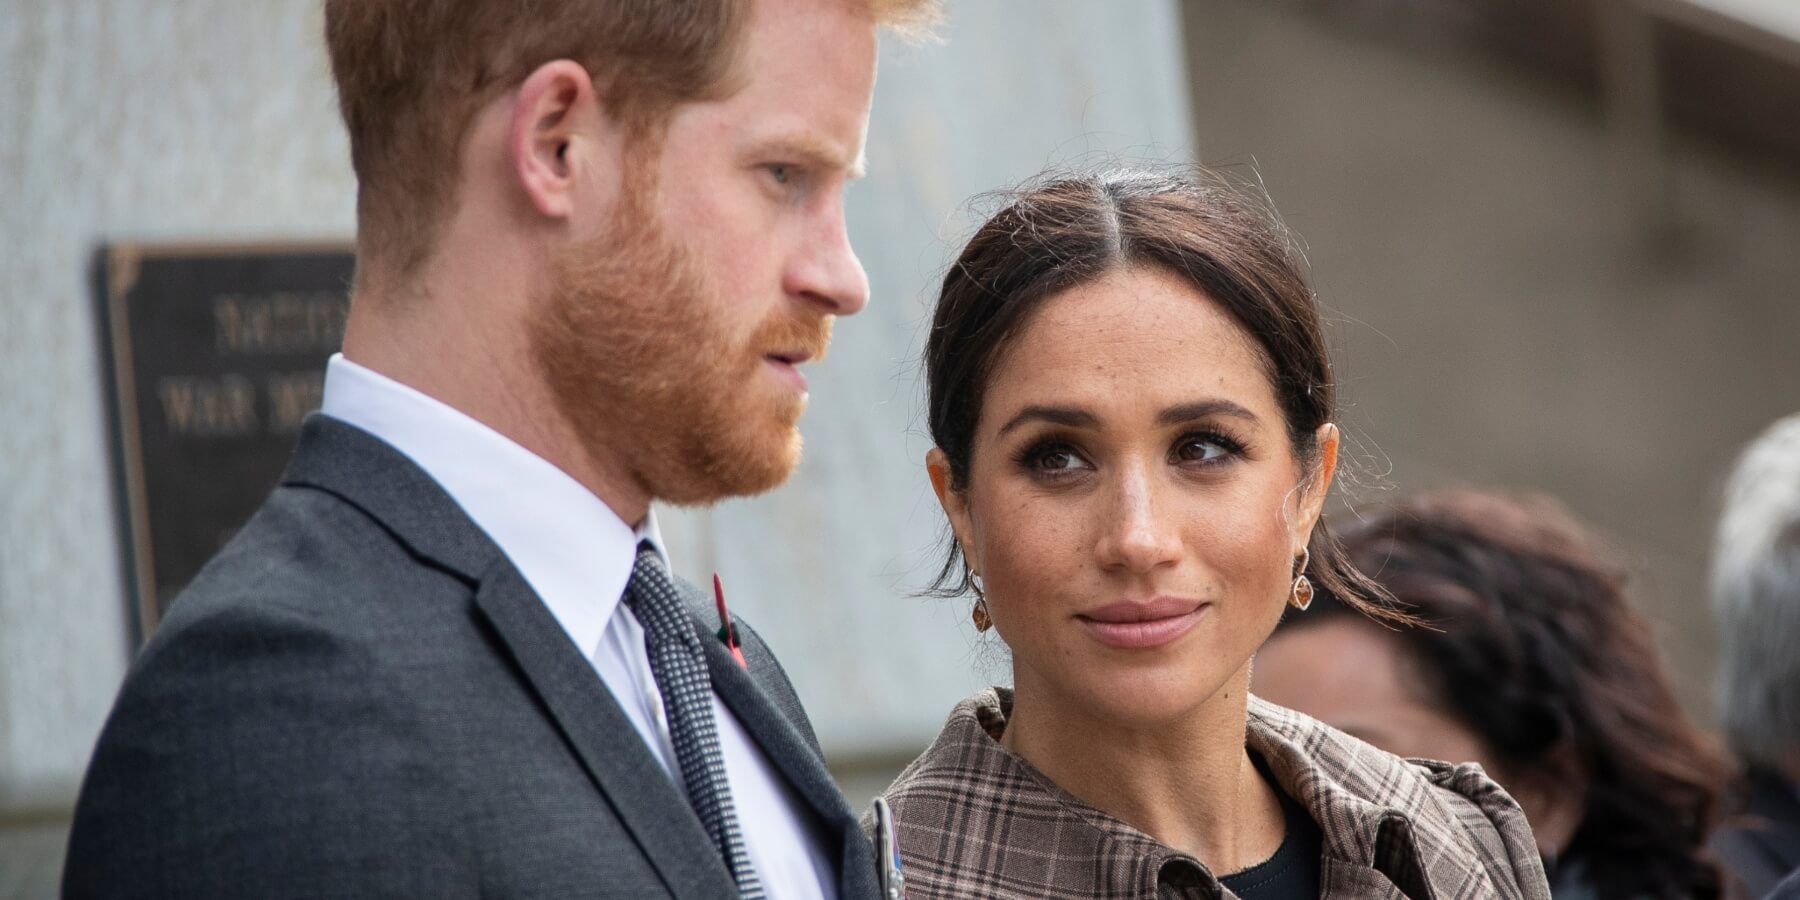 Prince Harry and Meghan Markle were engaged during a telling astrological season.